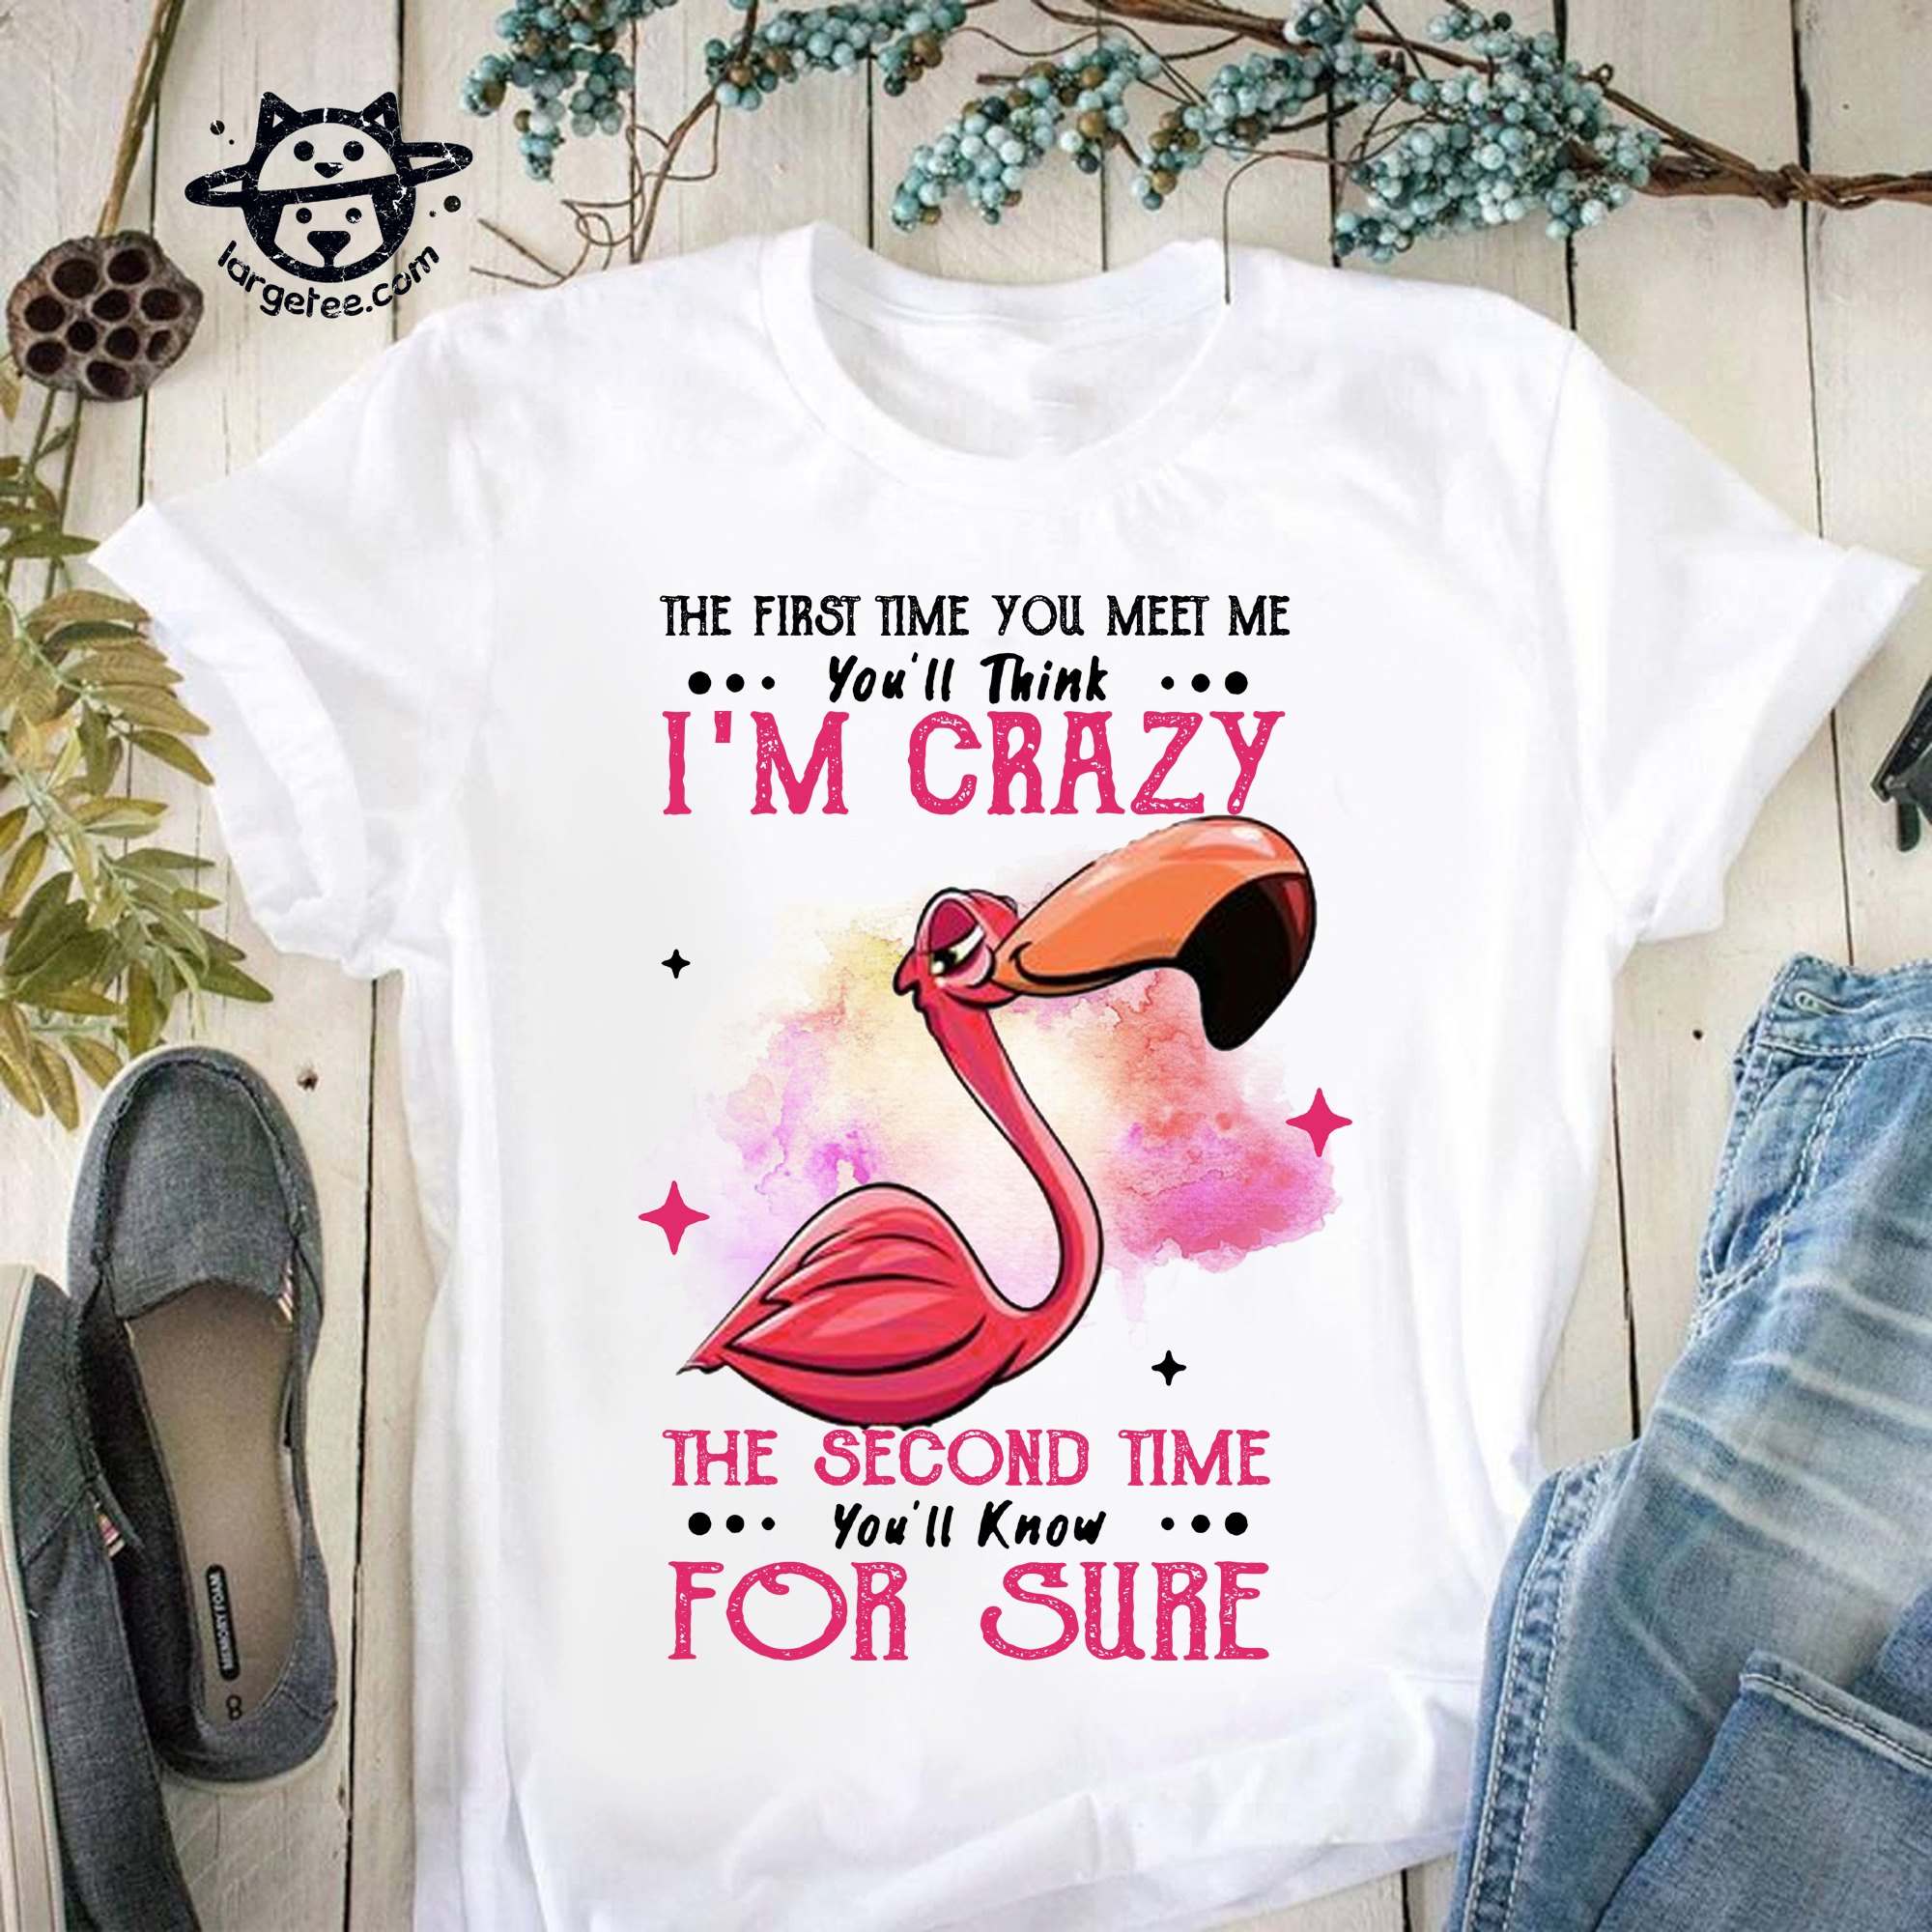 The first time you met me, you'll think I'm crazy the second time you'll know for sure - Crazy flamingo